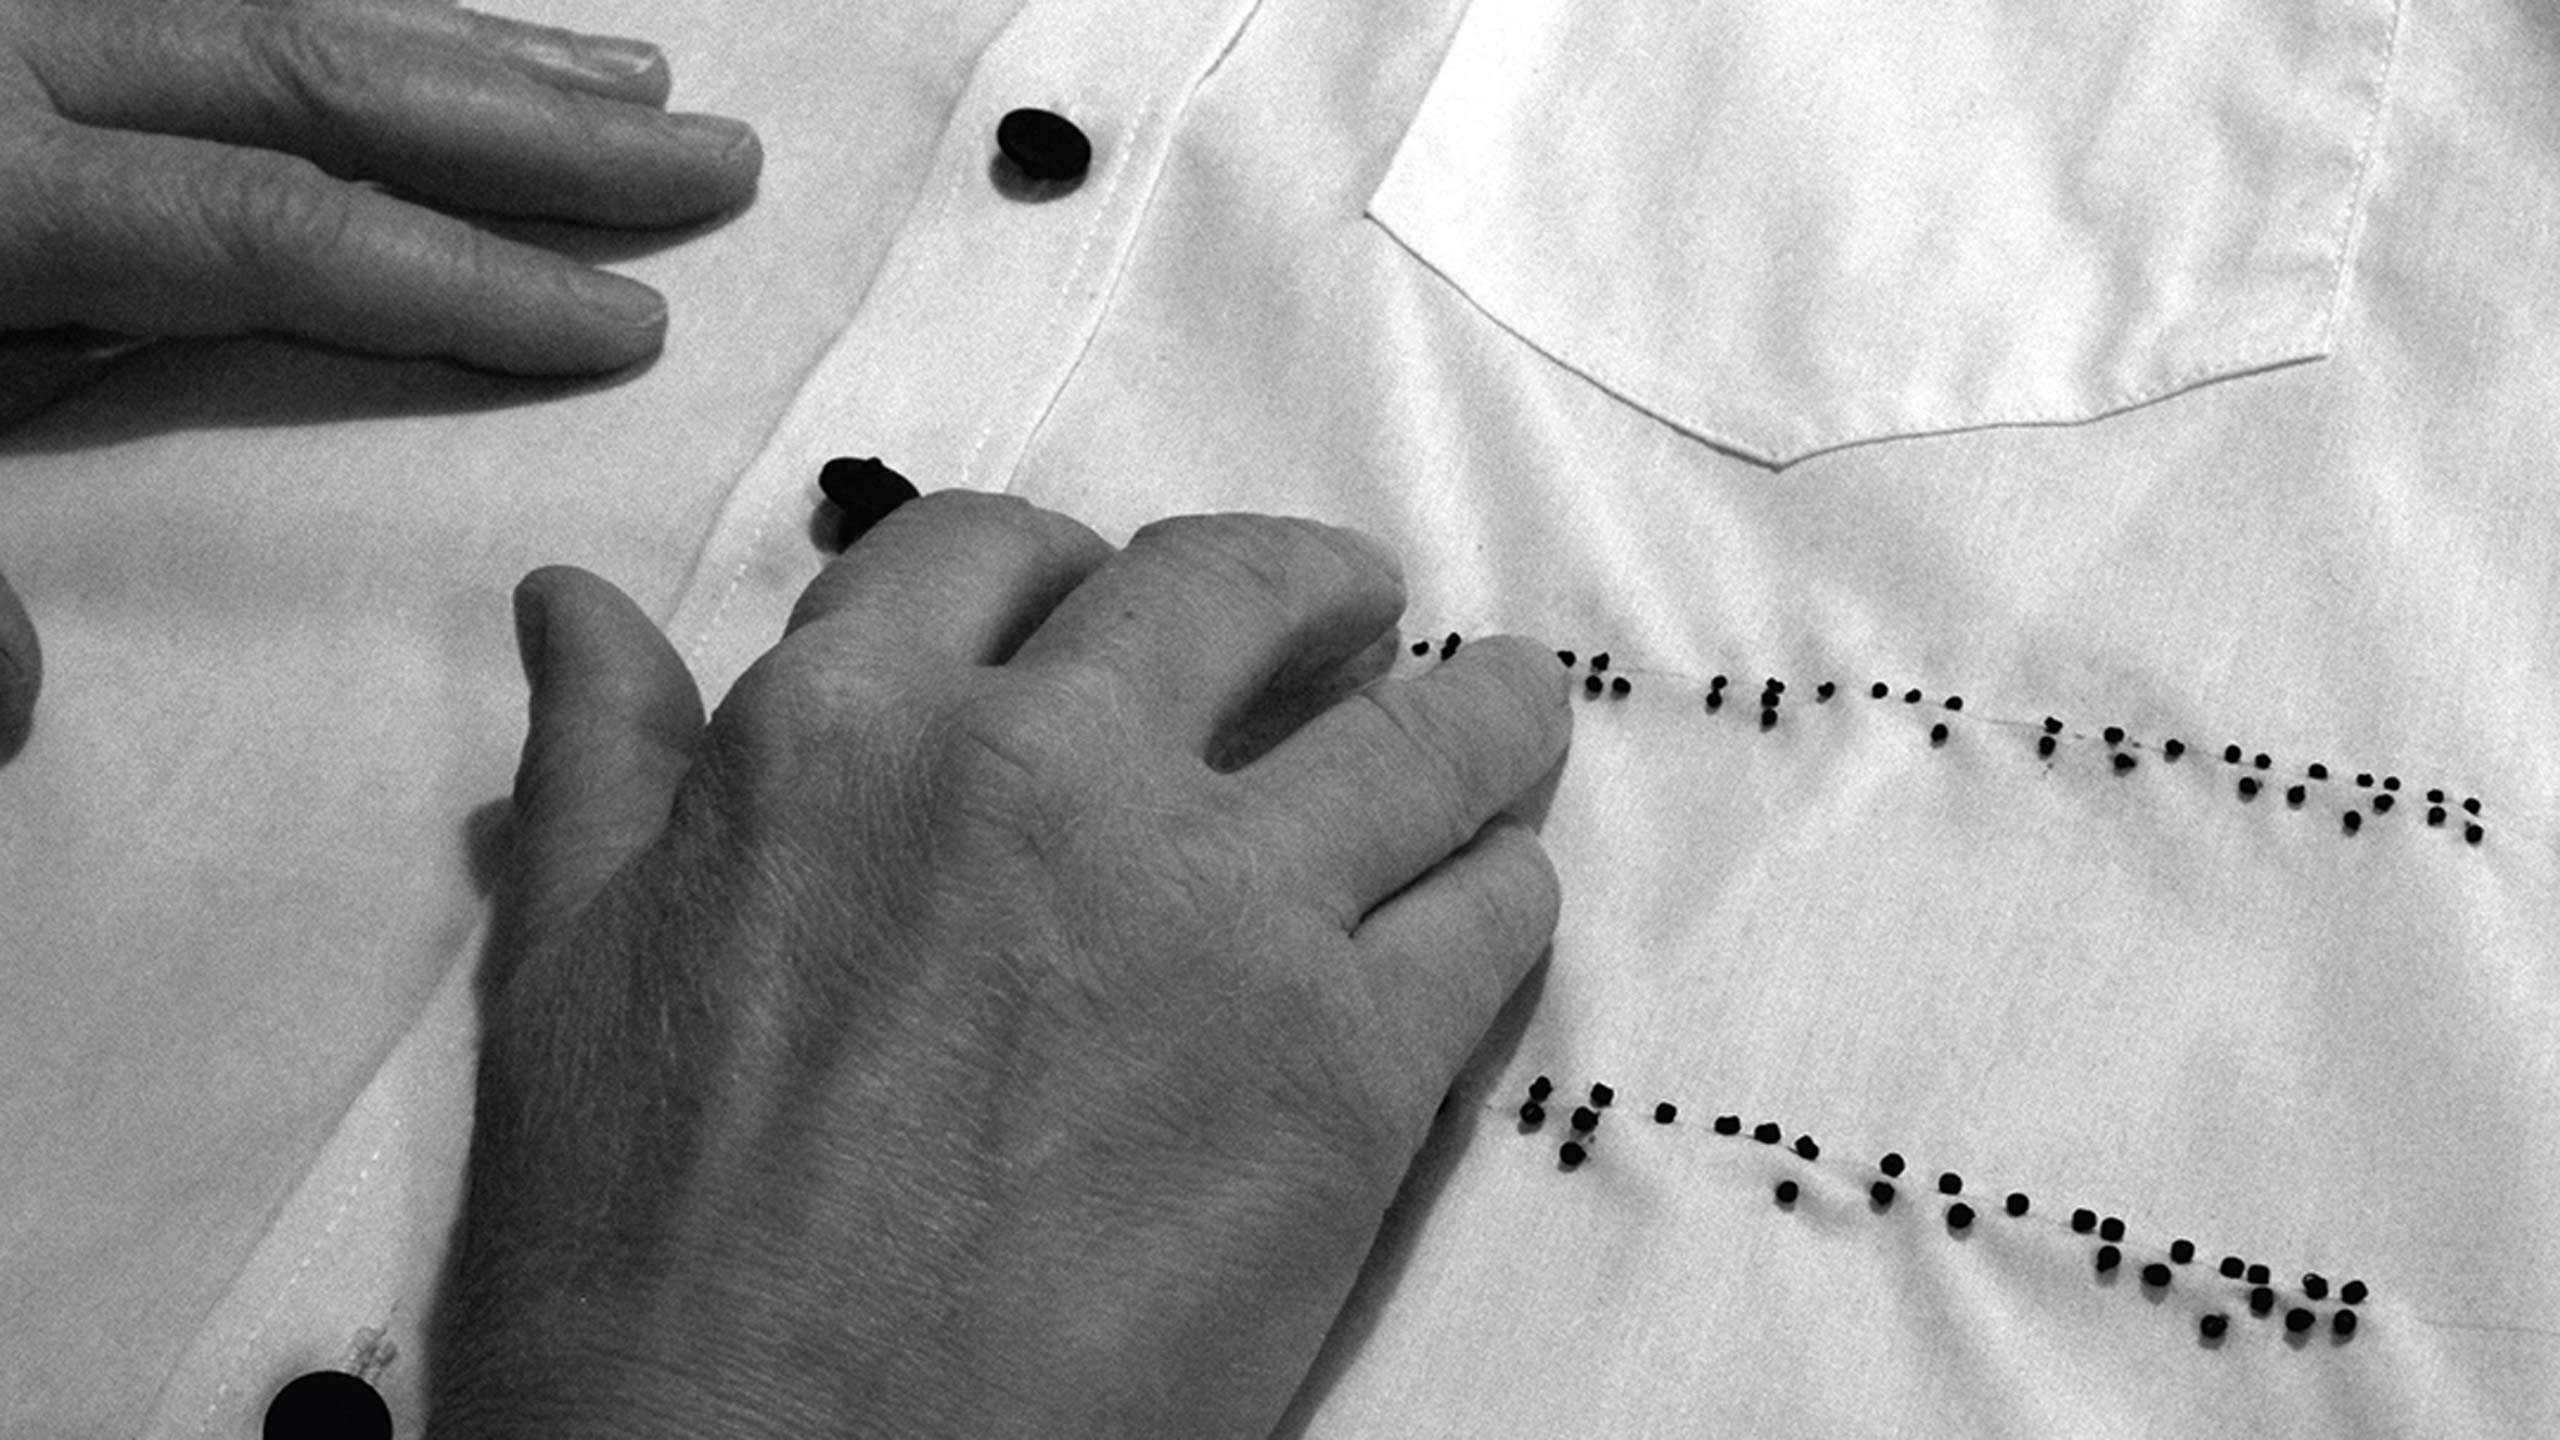 Hands reading braille on the front of a collared shirt